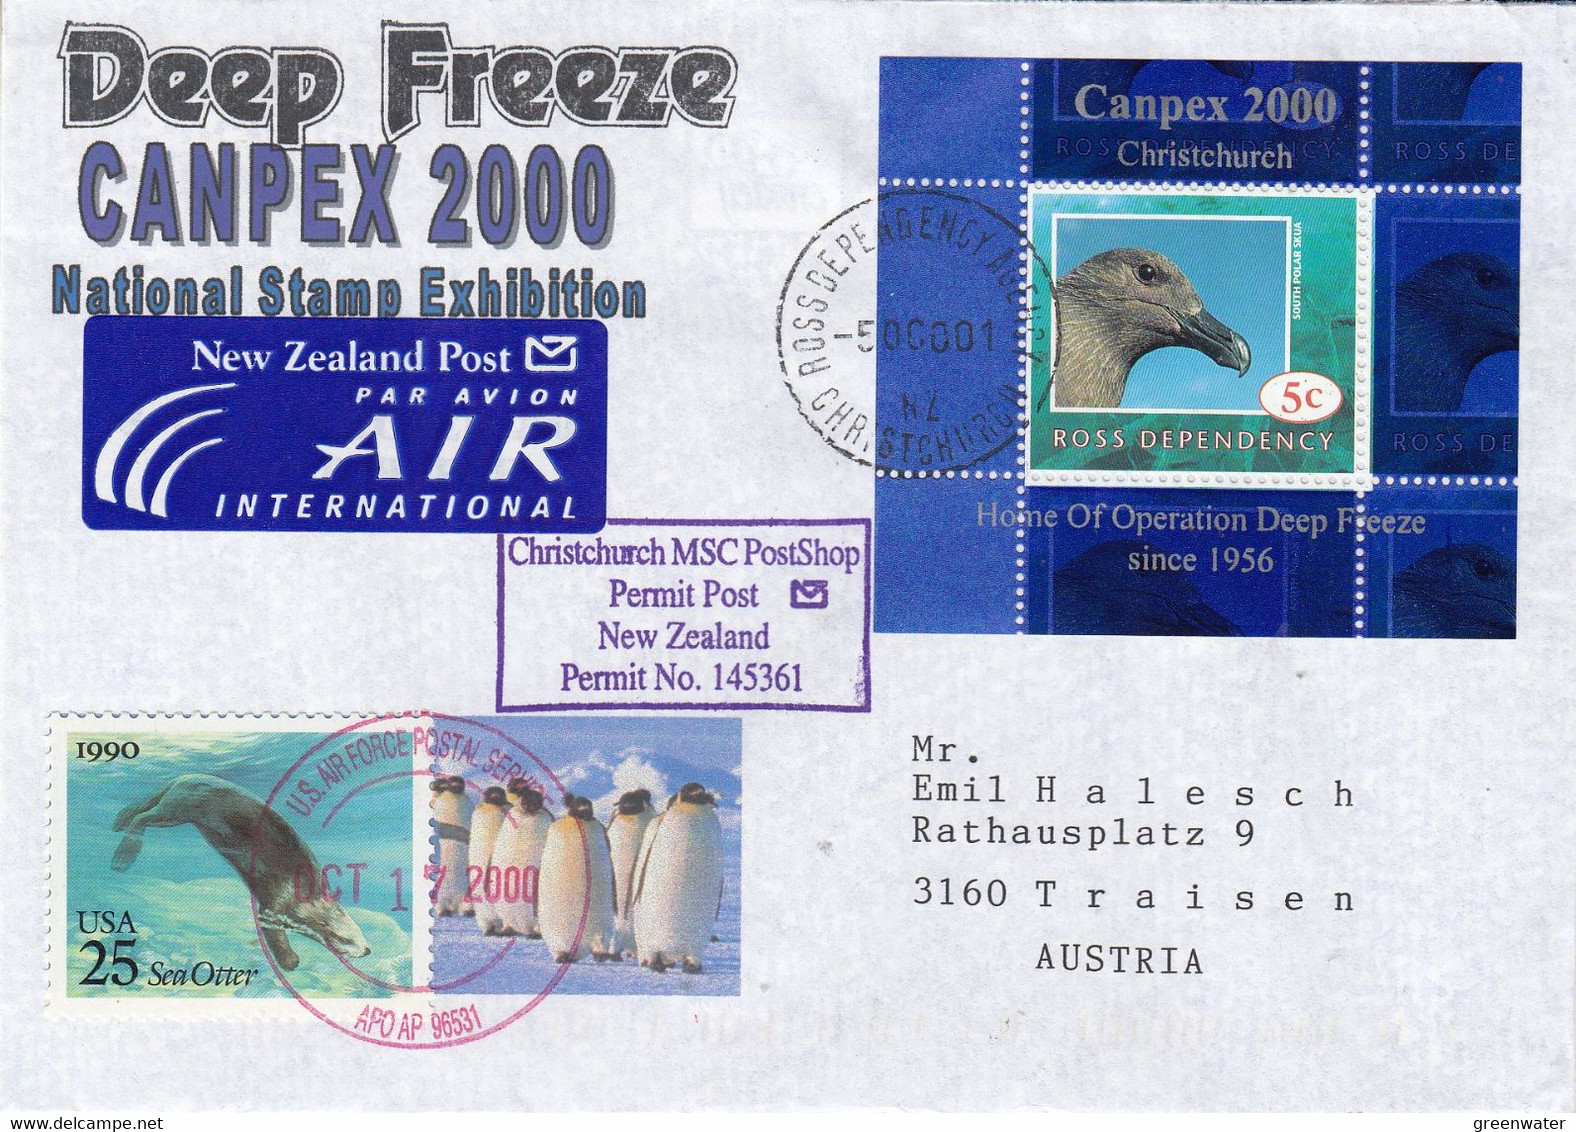 Ross Dependency 2000 Canpex Deep Freeze Ca Ross Dependency Christchurch 5 OCT 2001 Ca US Air Force (GPA121C) - Lettres & Documents